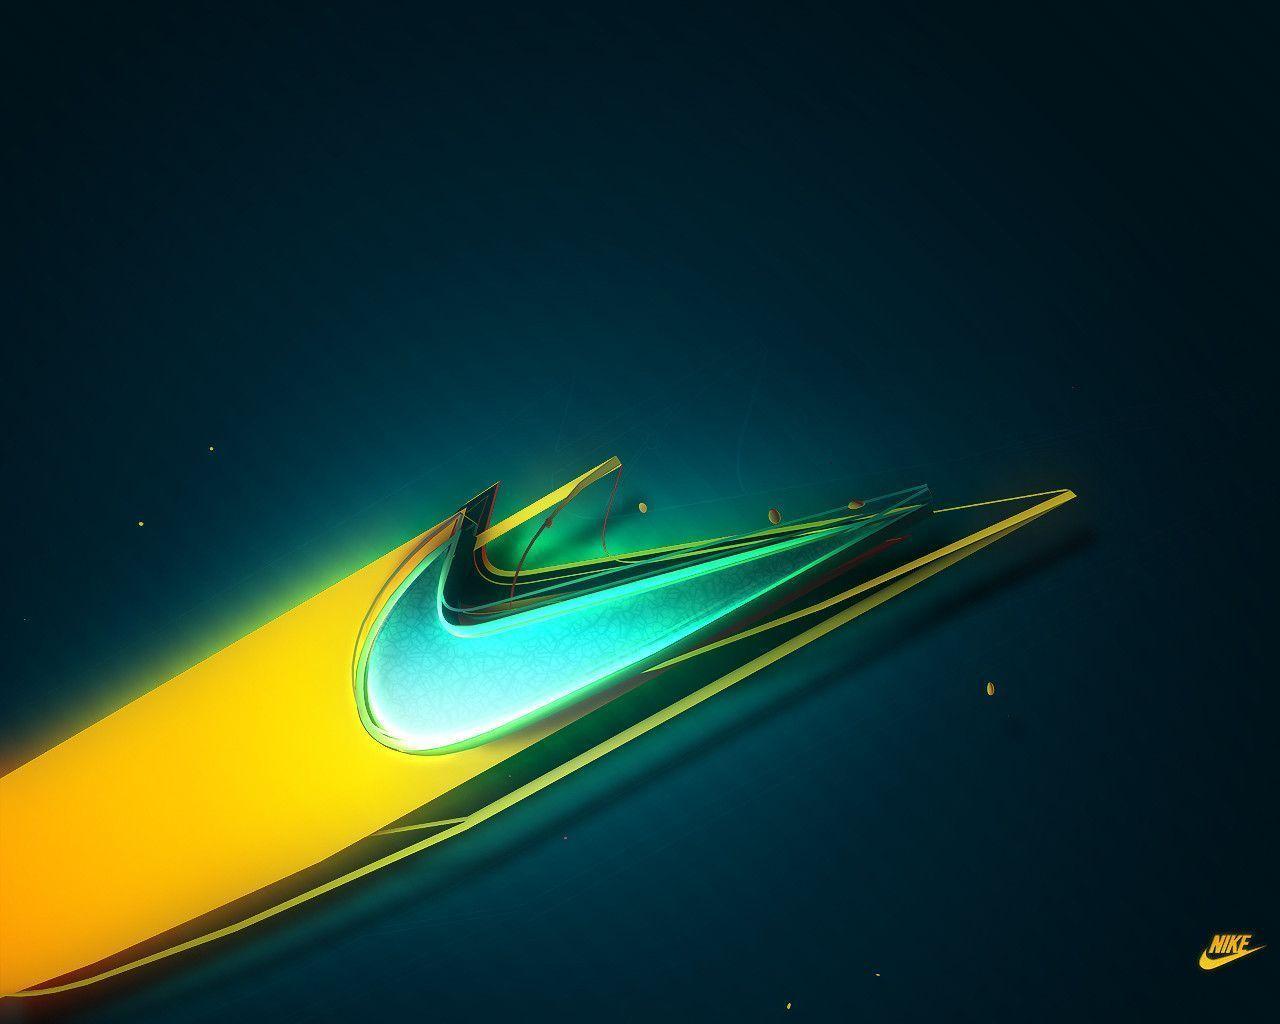 Nike Wallpaper. Daily inspiration art photo, picture